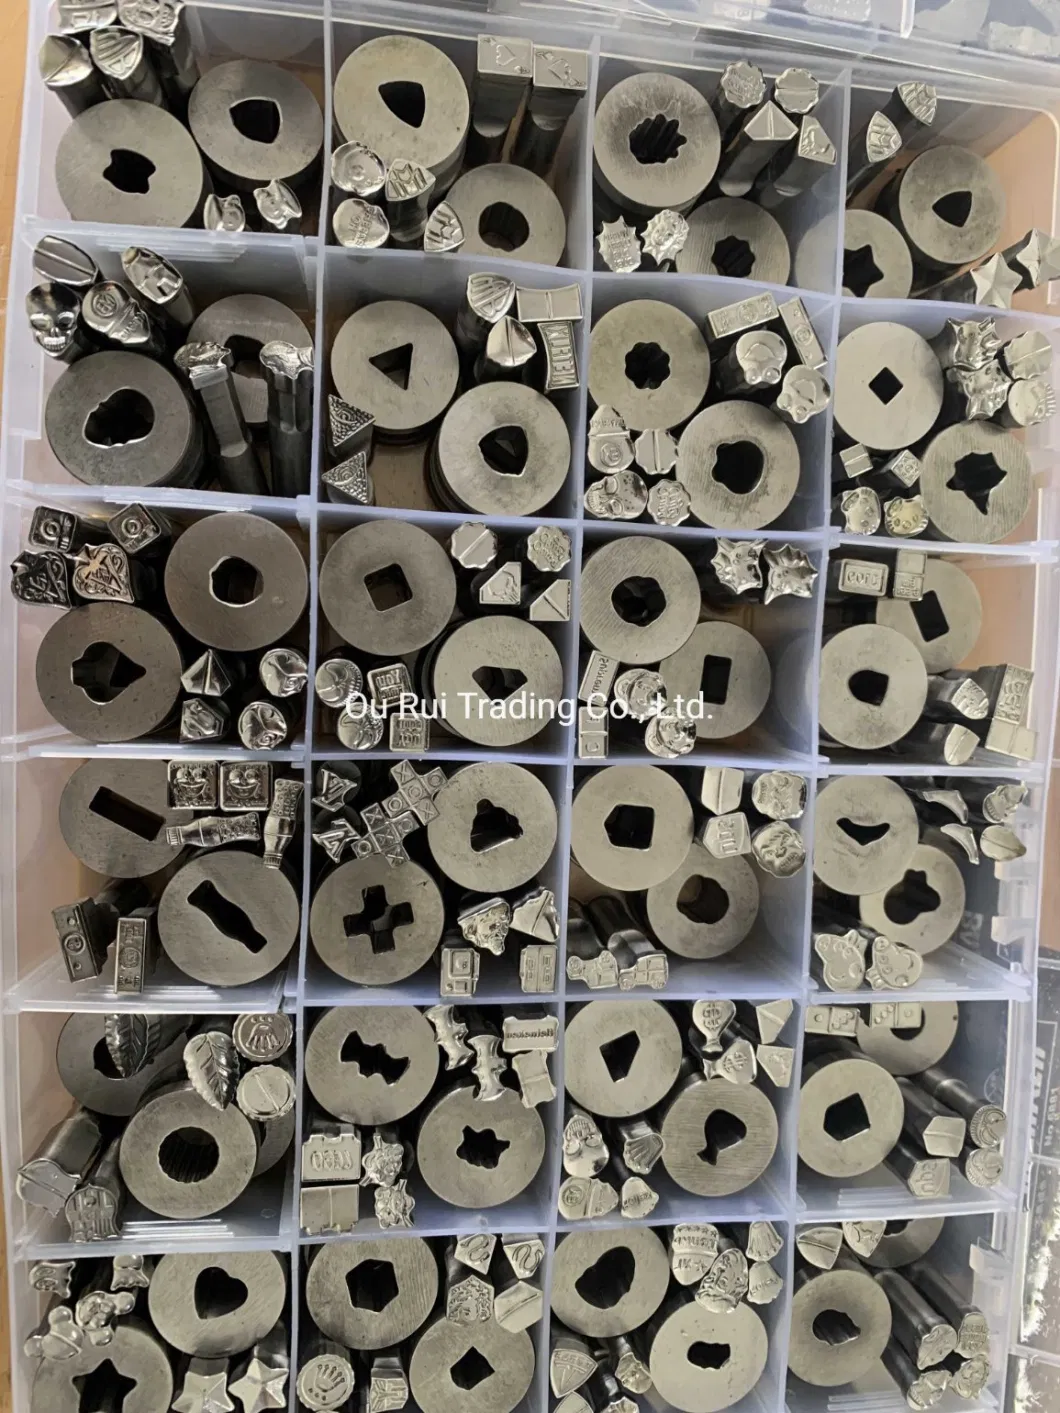 Number A215 Provide Core Tod Tooling Pellet. Pill Tablet Press Mold for Zp or Tdp0, Tdp1.5, Tdp5, Tdp6 Pill Machine